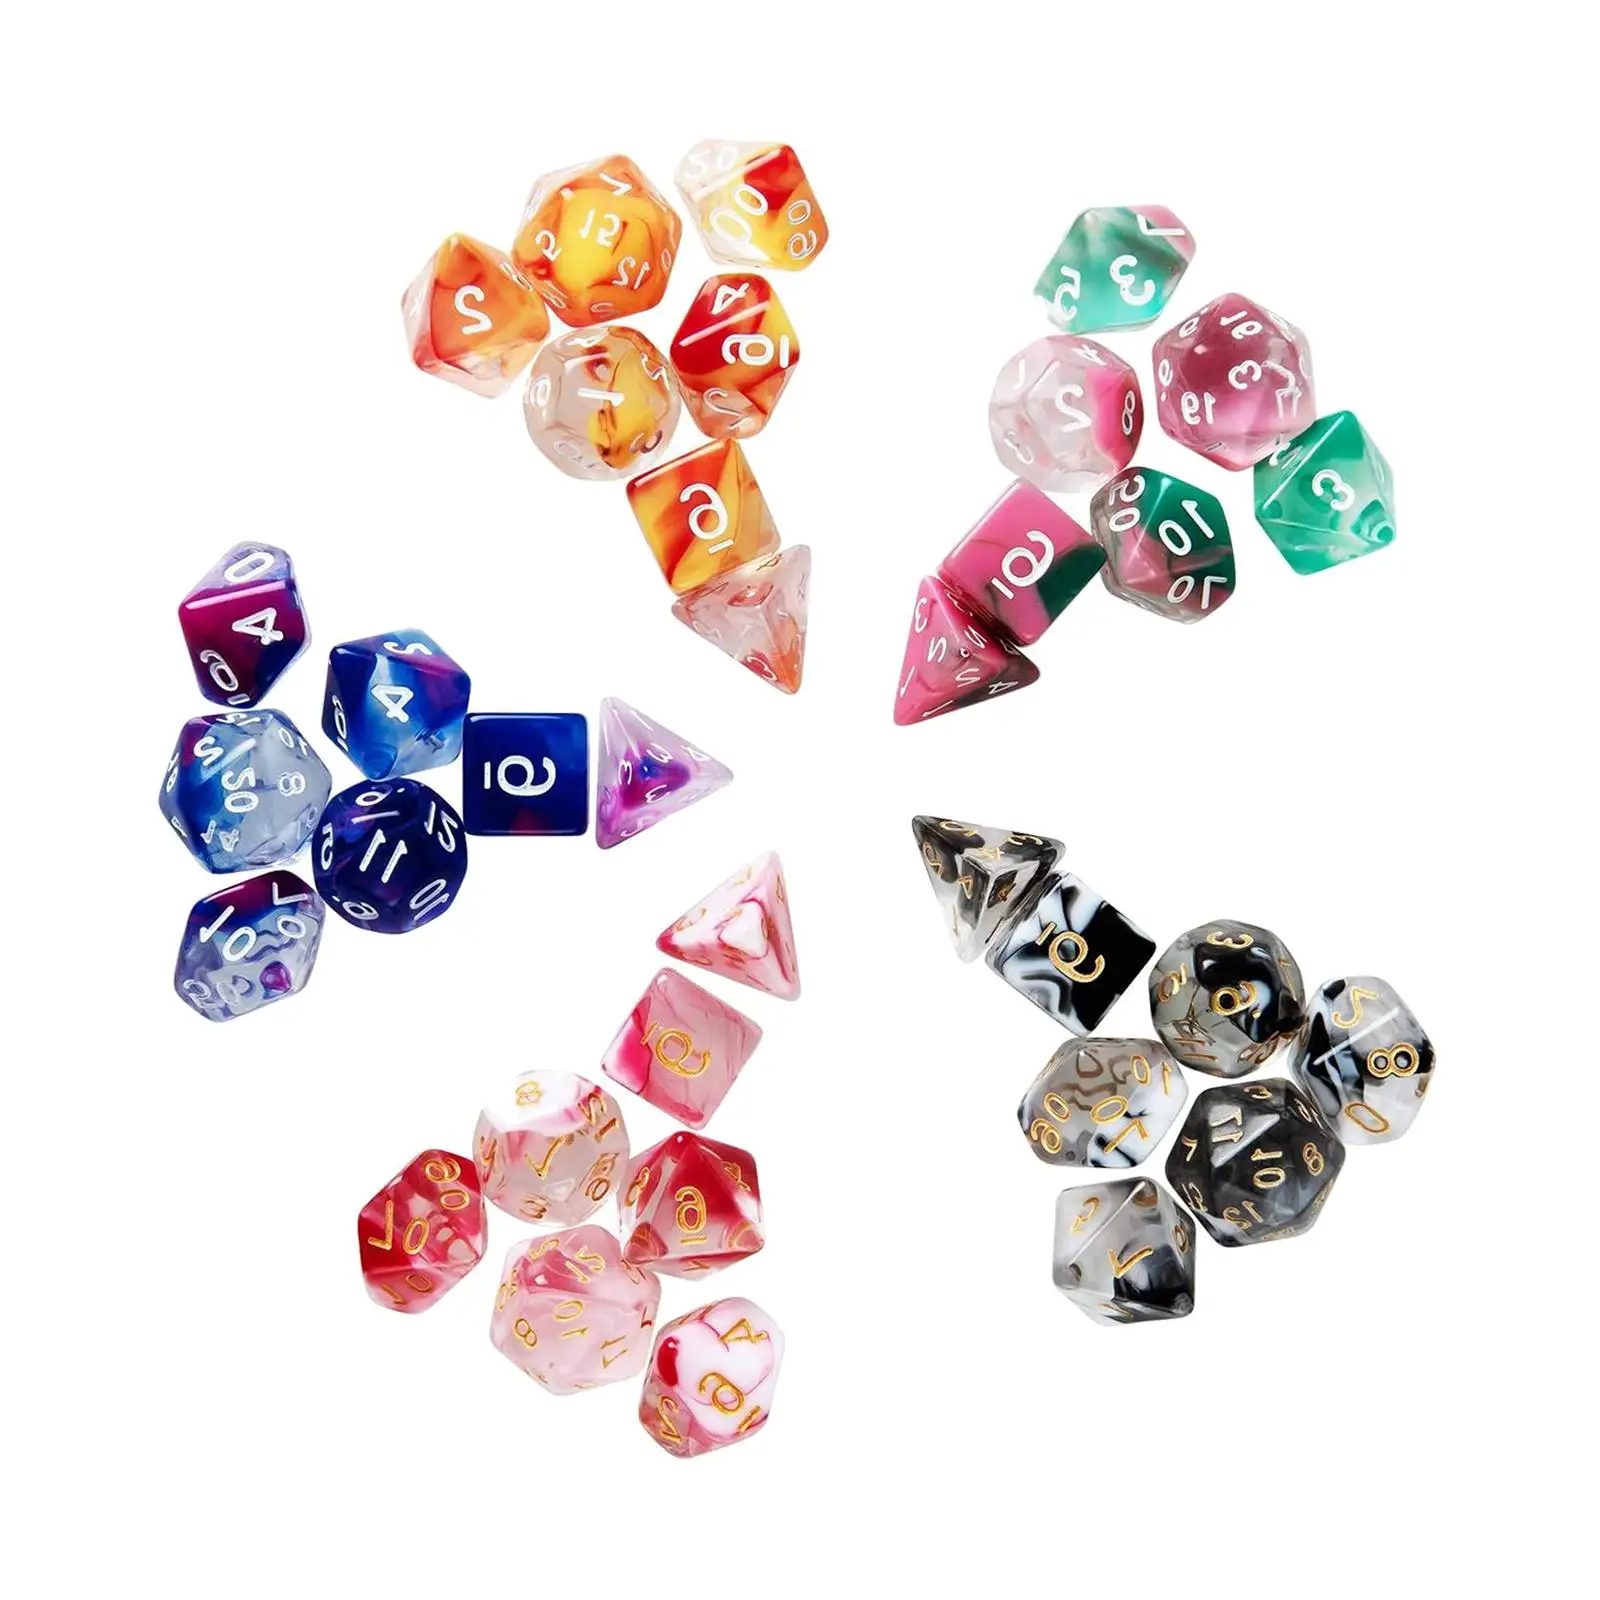 35x Polyhedral Dices Set Bar Toys D4-D20 Entertainment Toys for Card Games Board Game